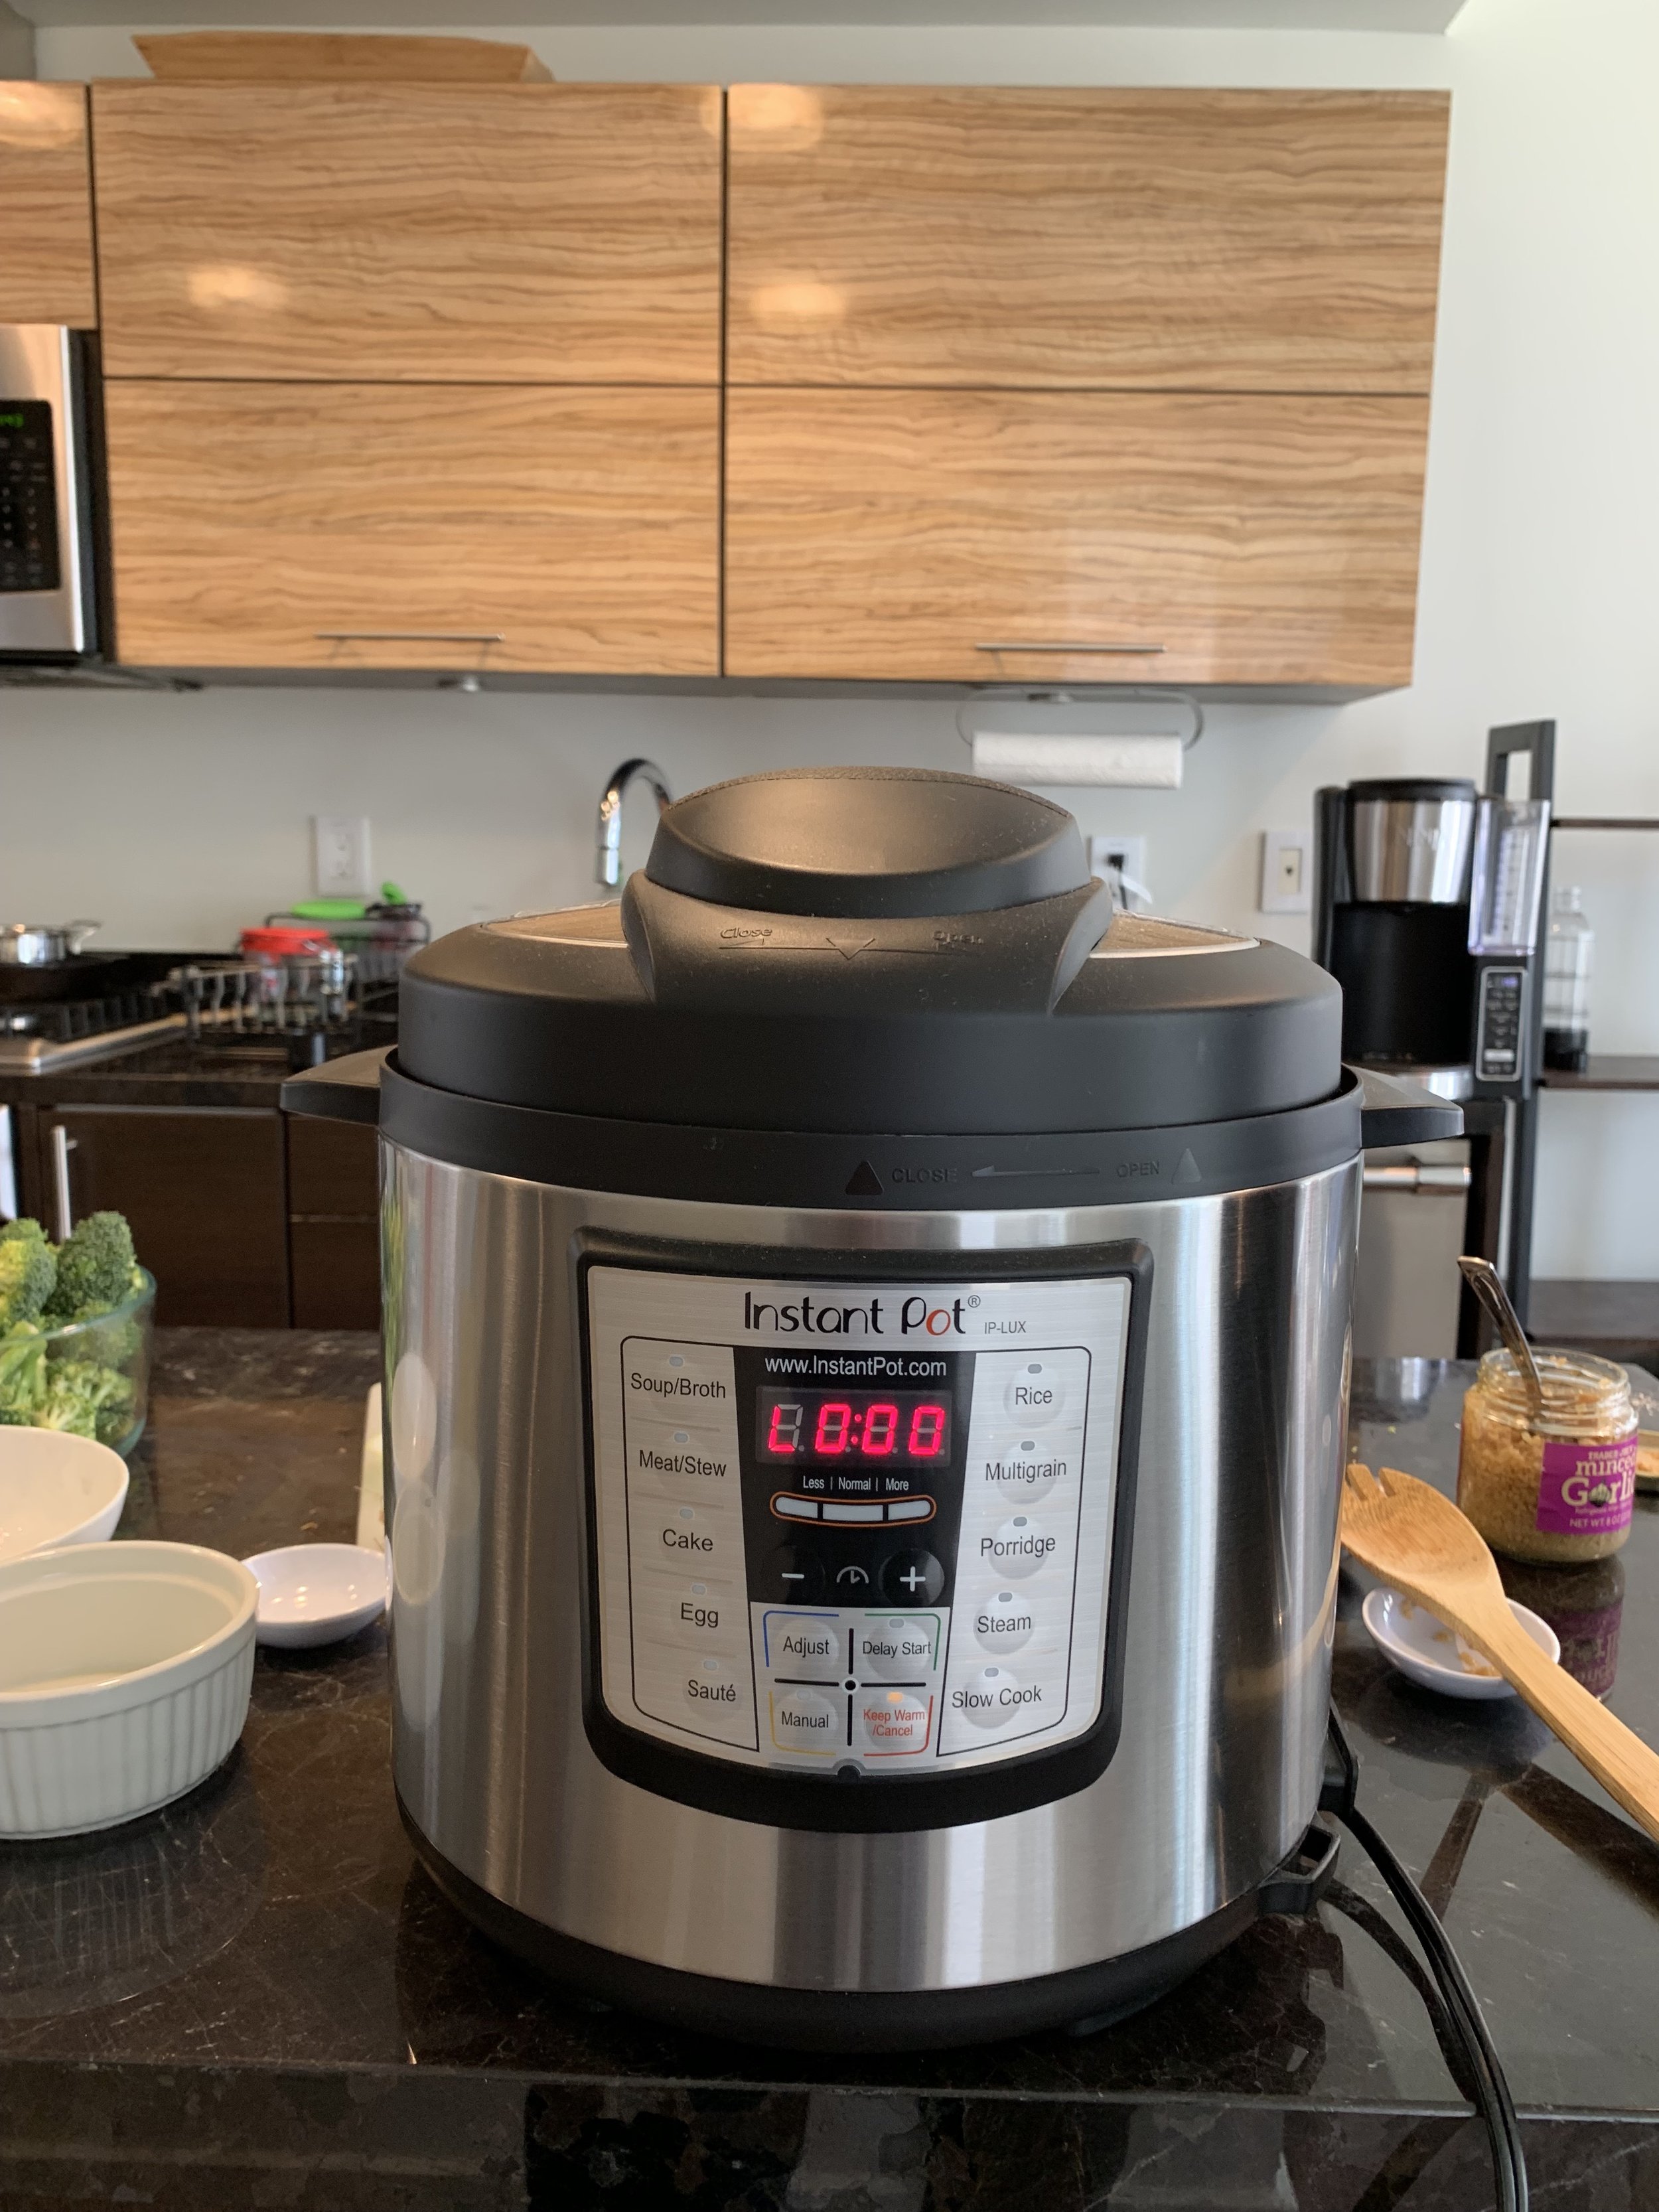 How to Use the Instant Pot: Once Instant Pot is Done it will stay on "warm"